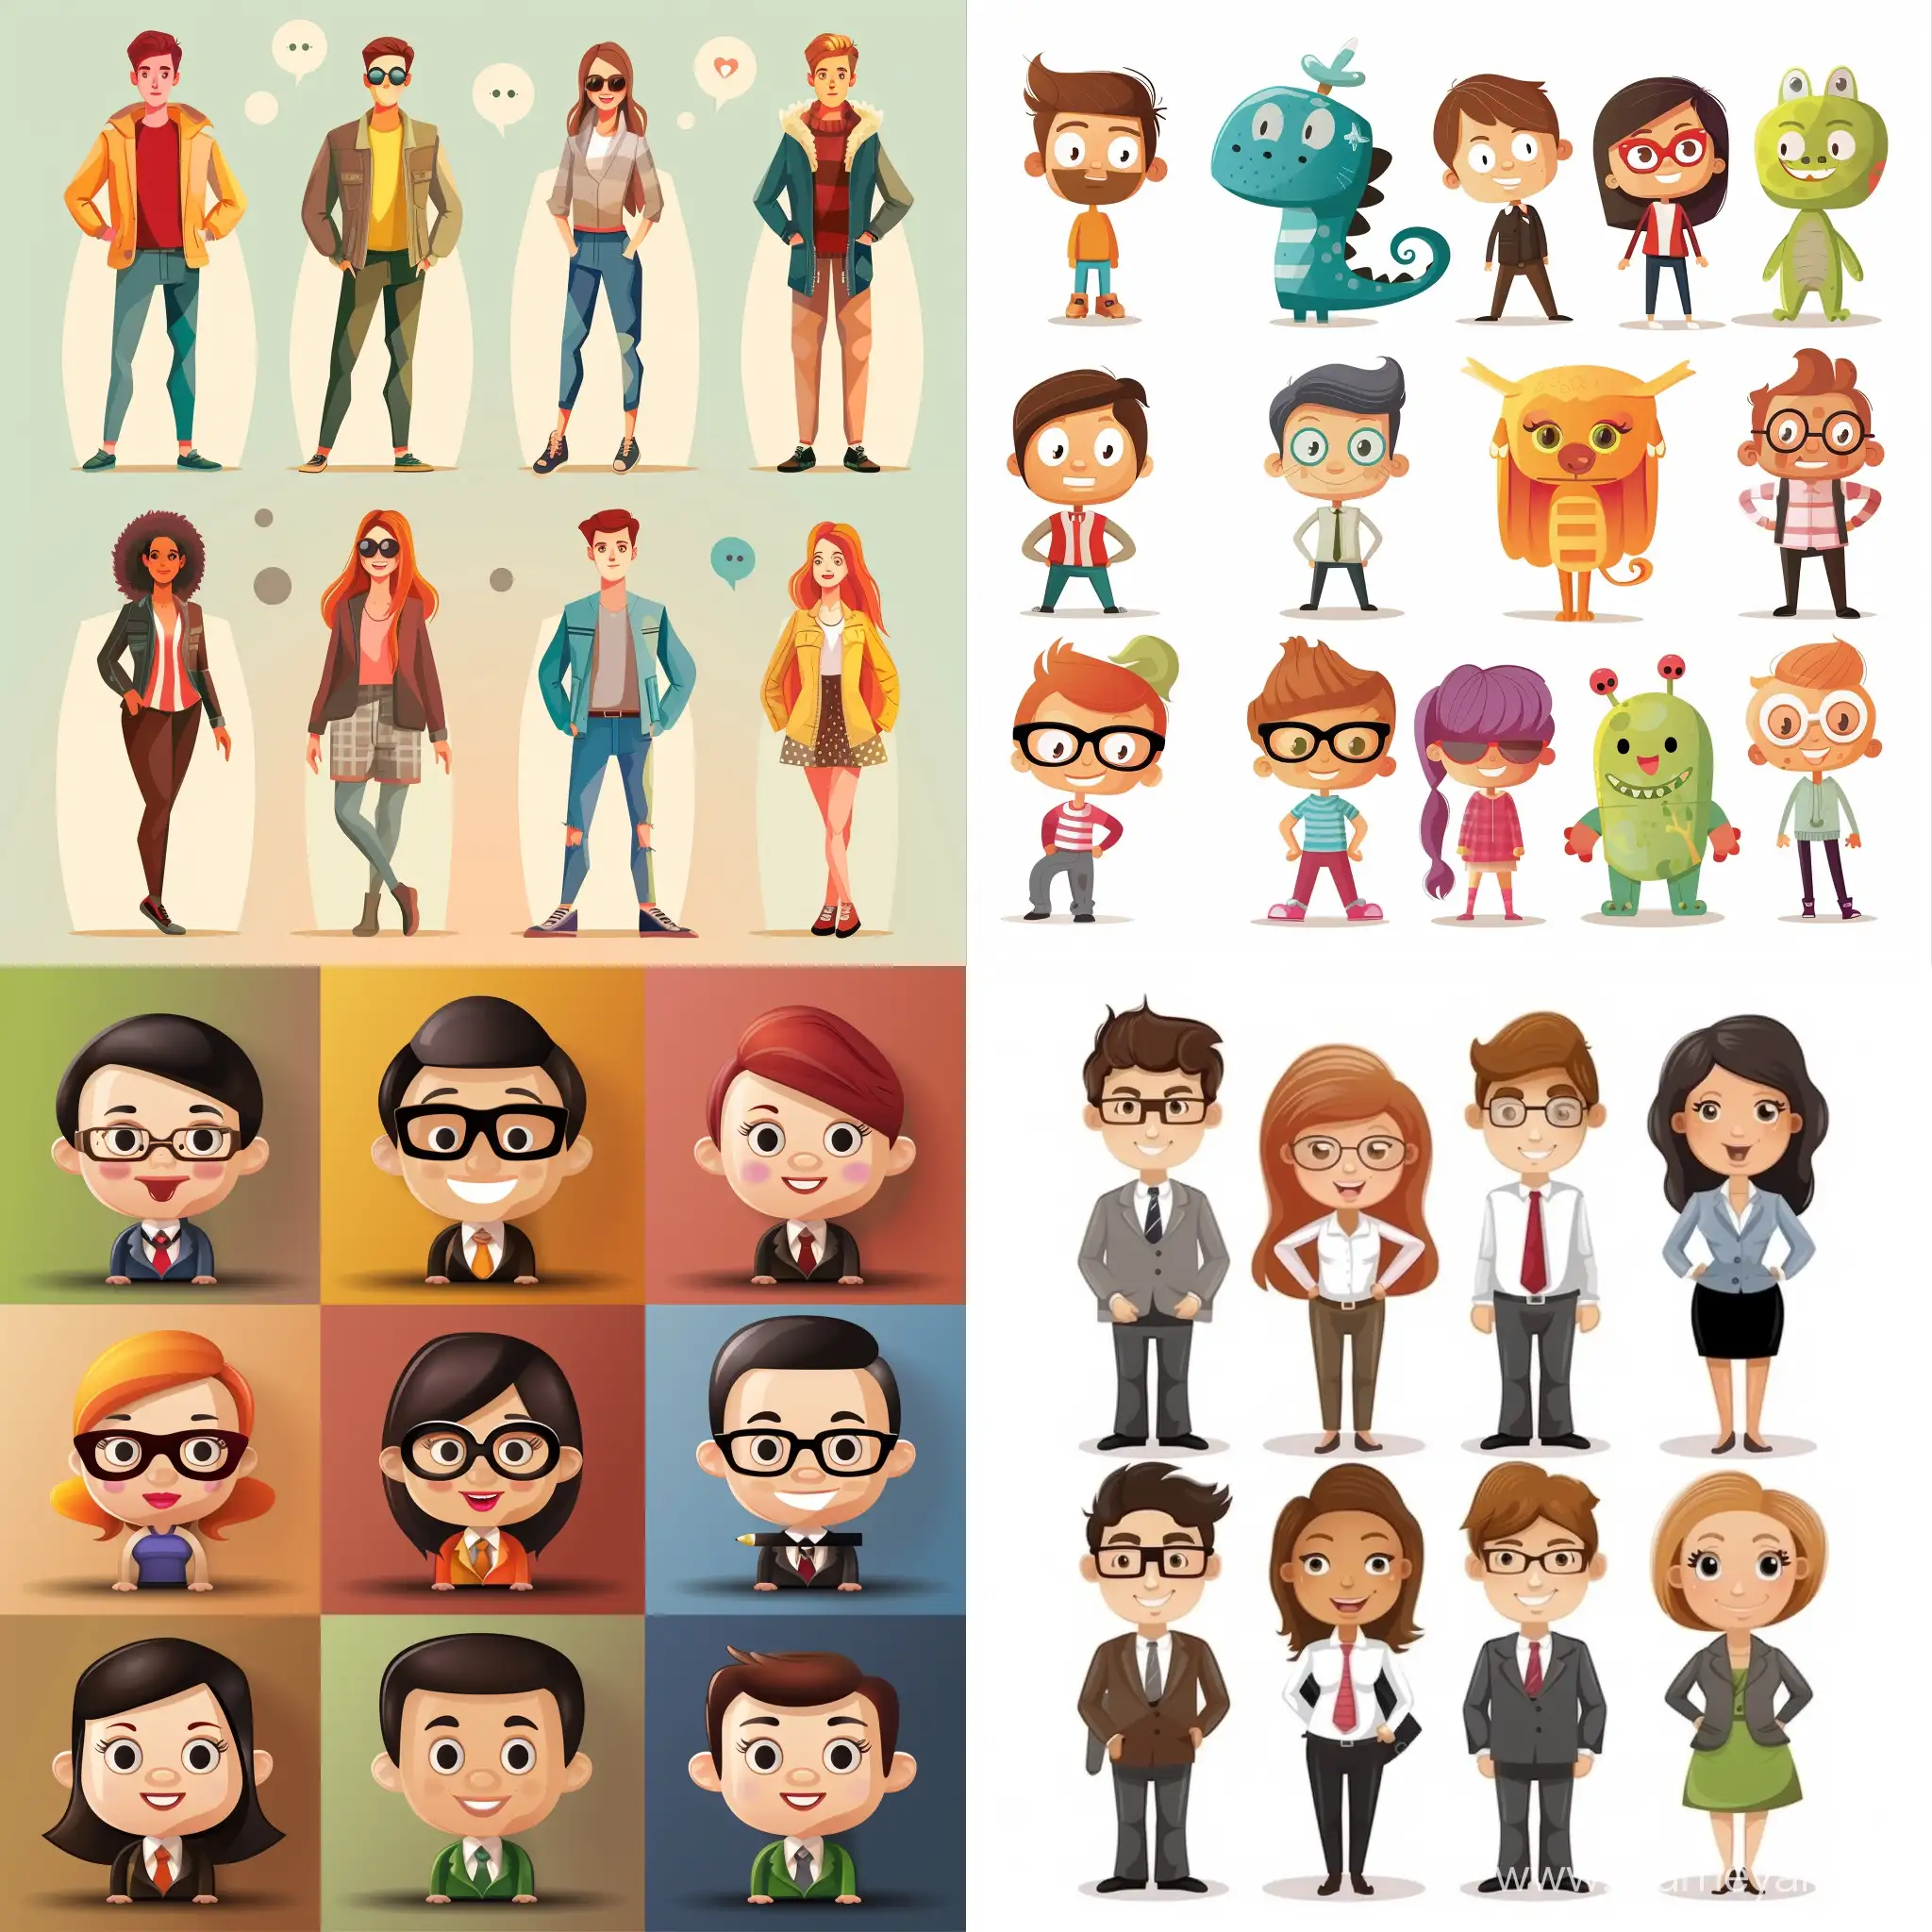 Colorful-Vector-Stock-Characters-Playful-and-Expressive-Illustrations